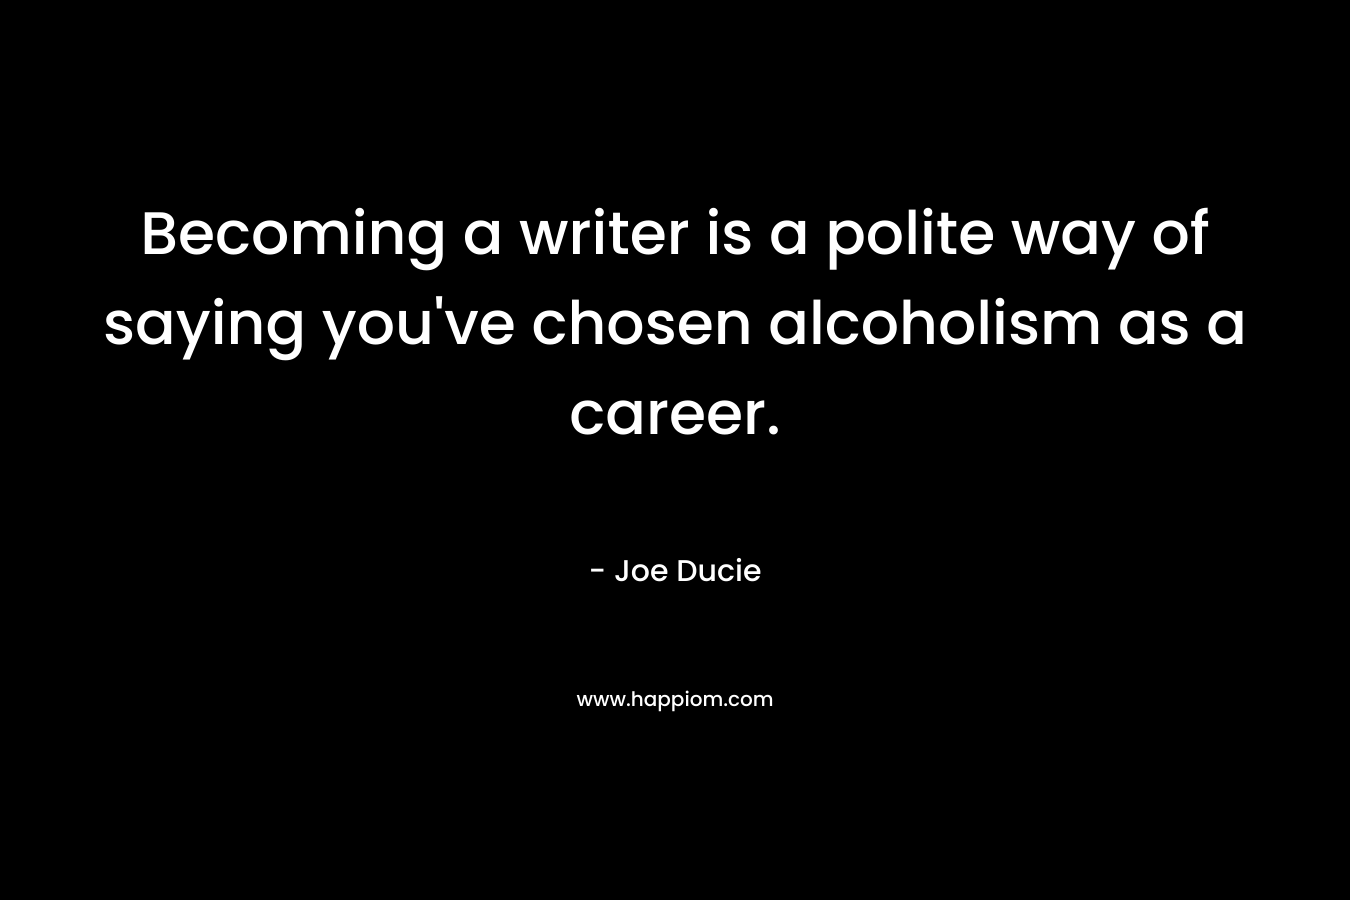 Becoming a writer is a polite way of saying you've chosen alcoholism as a career.